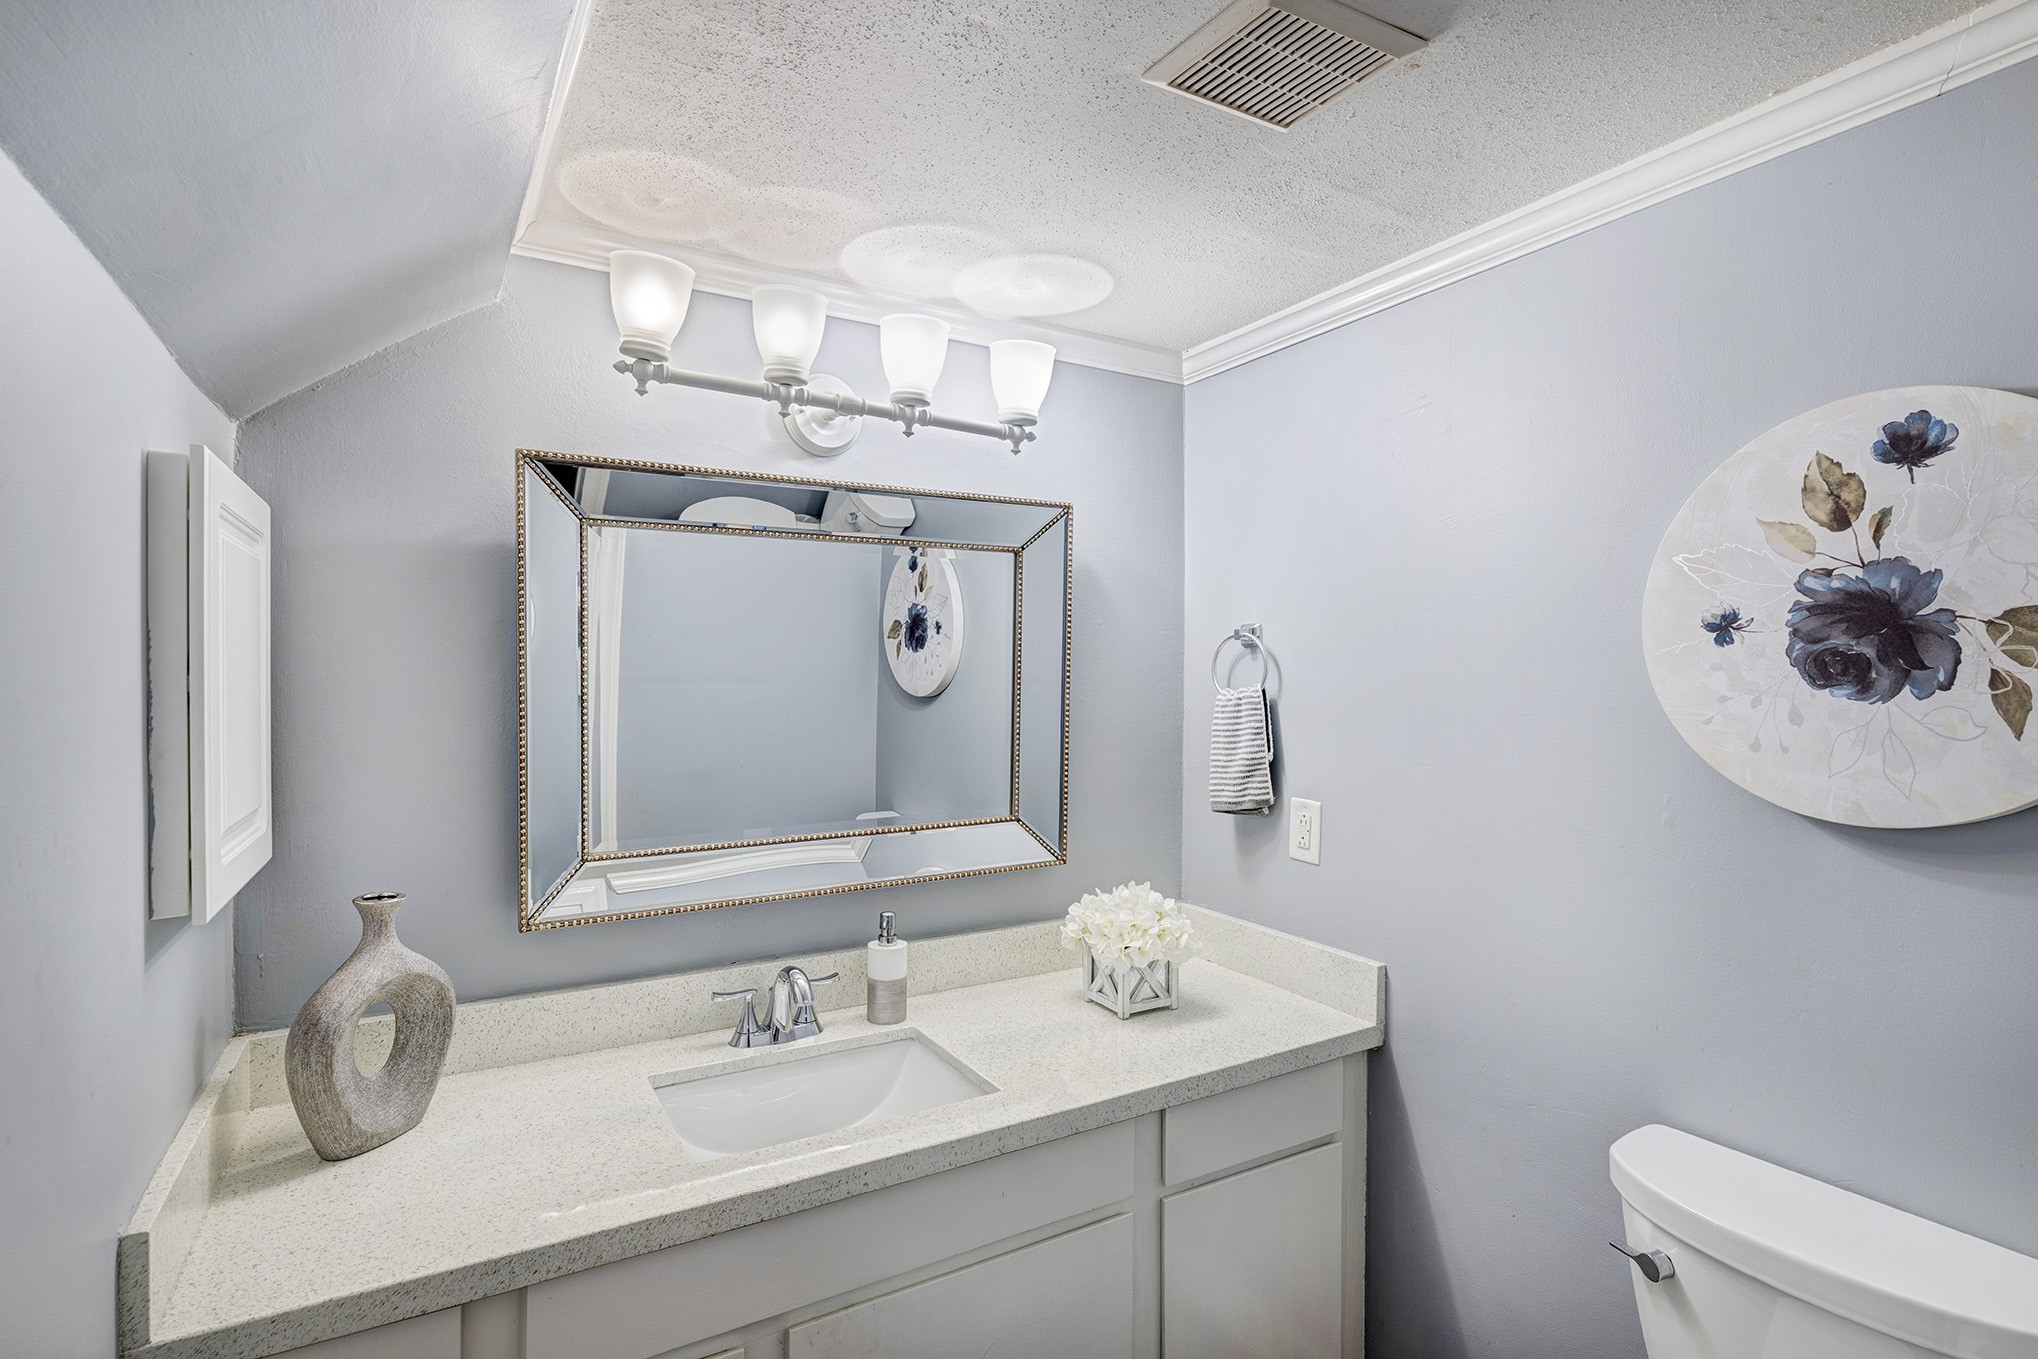 Located on the first floor just off the kitchen is a chic powder bath with a furniture-piece vanity and sconce lighting above.